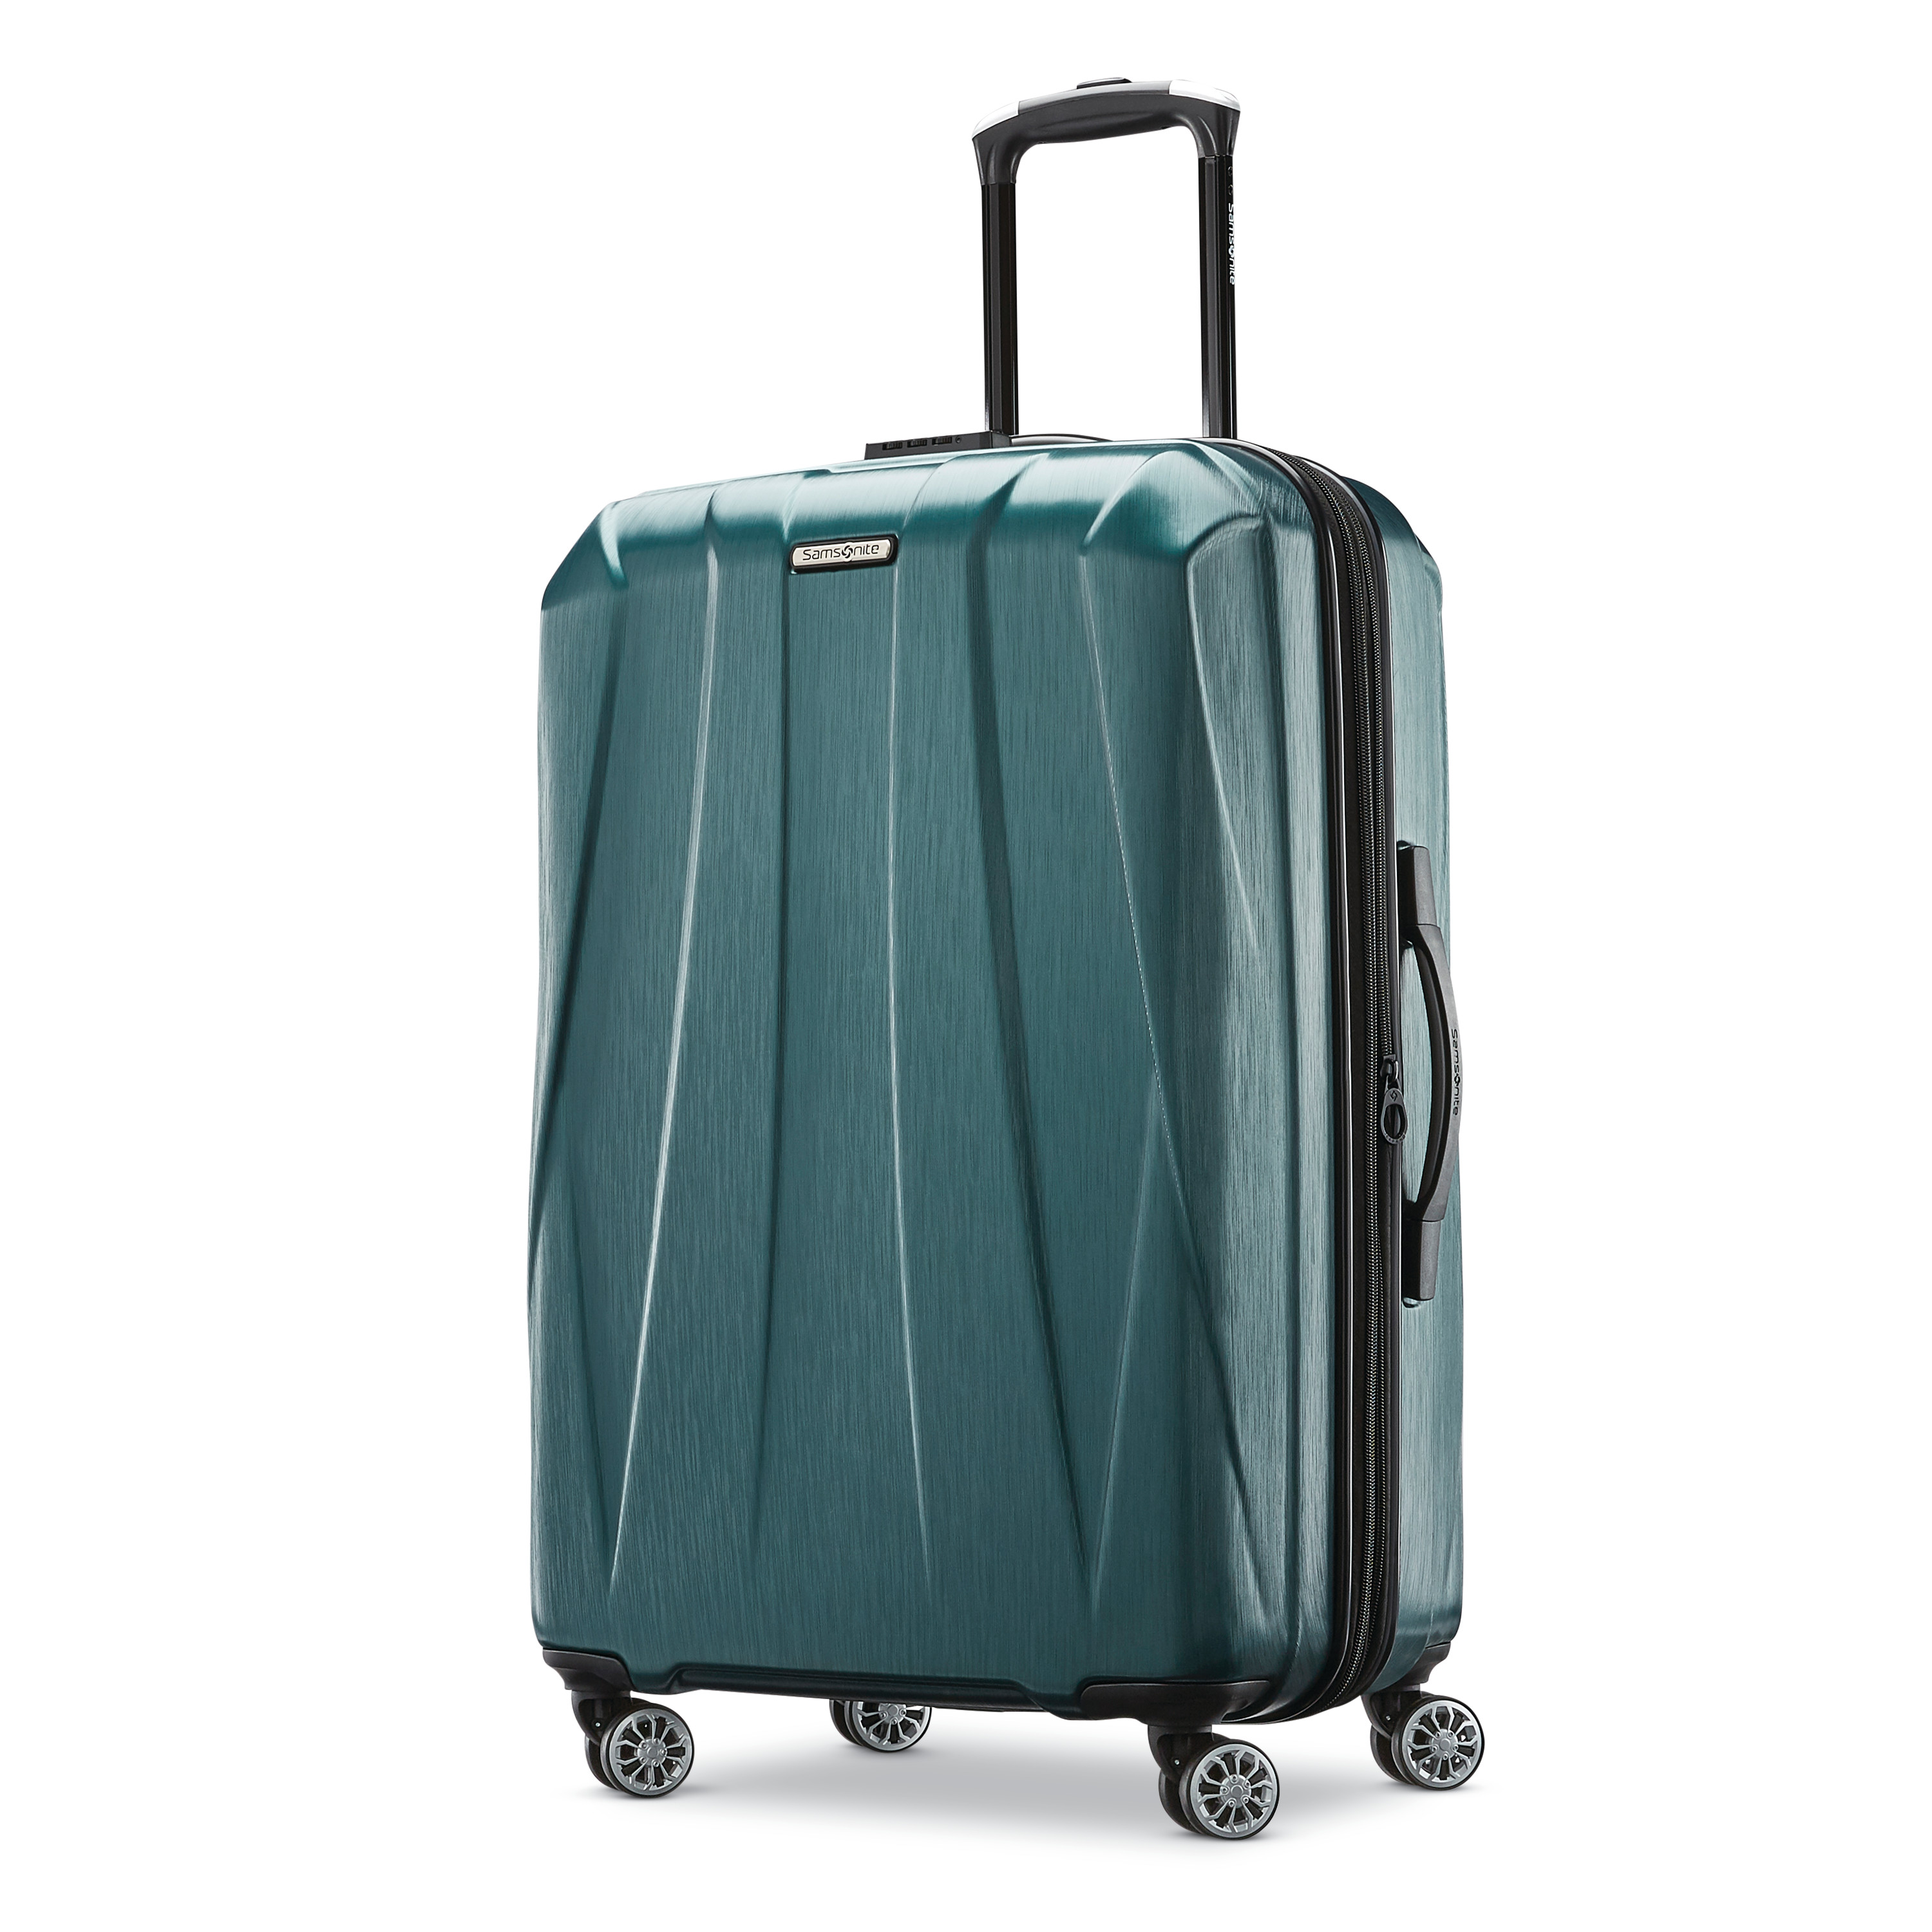 Samsonite Centric 2 Expandable Hardside Carry On Luggage with Dual ...